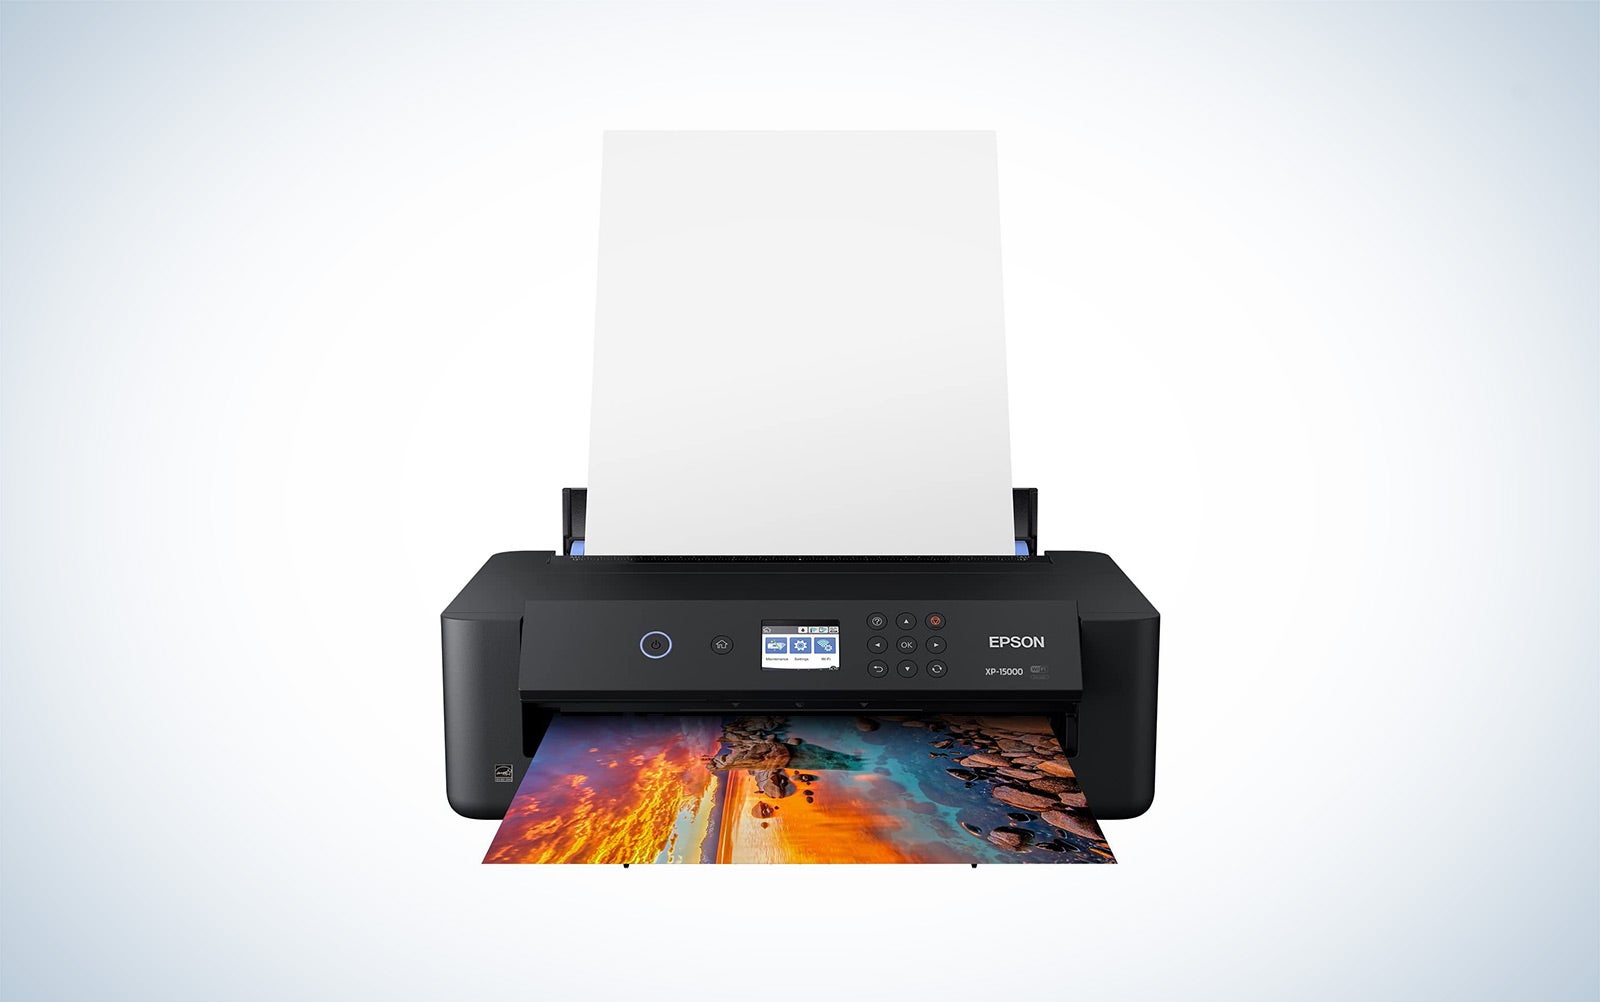 The Epson Expression Photo HD XP-15000 is the best wide format printer.